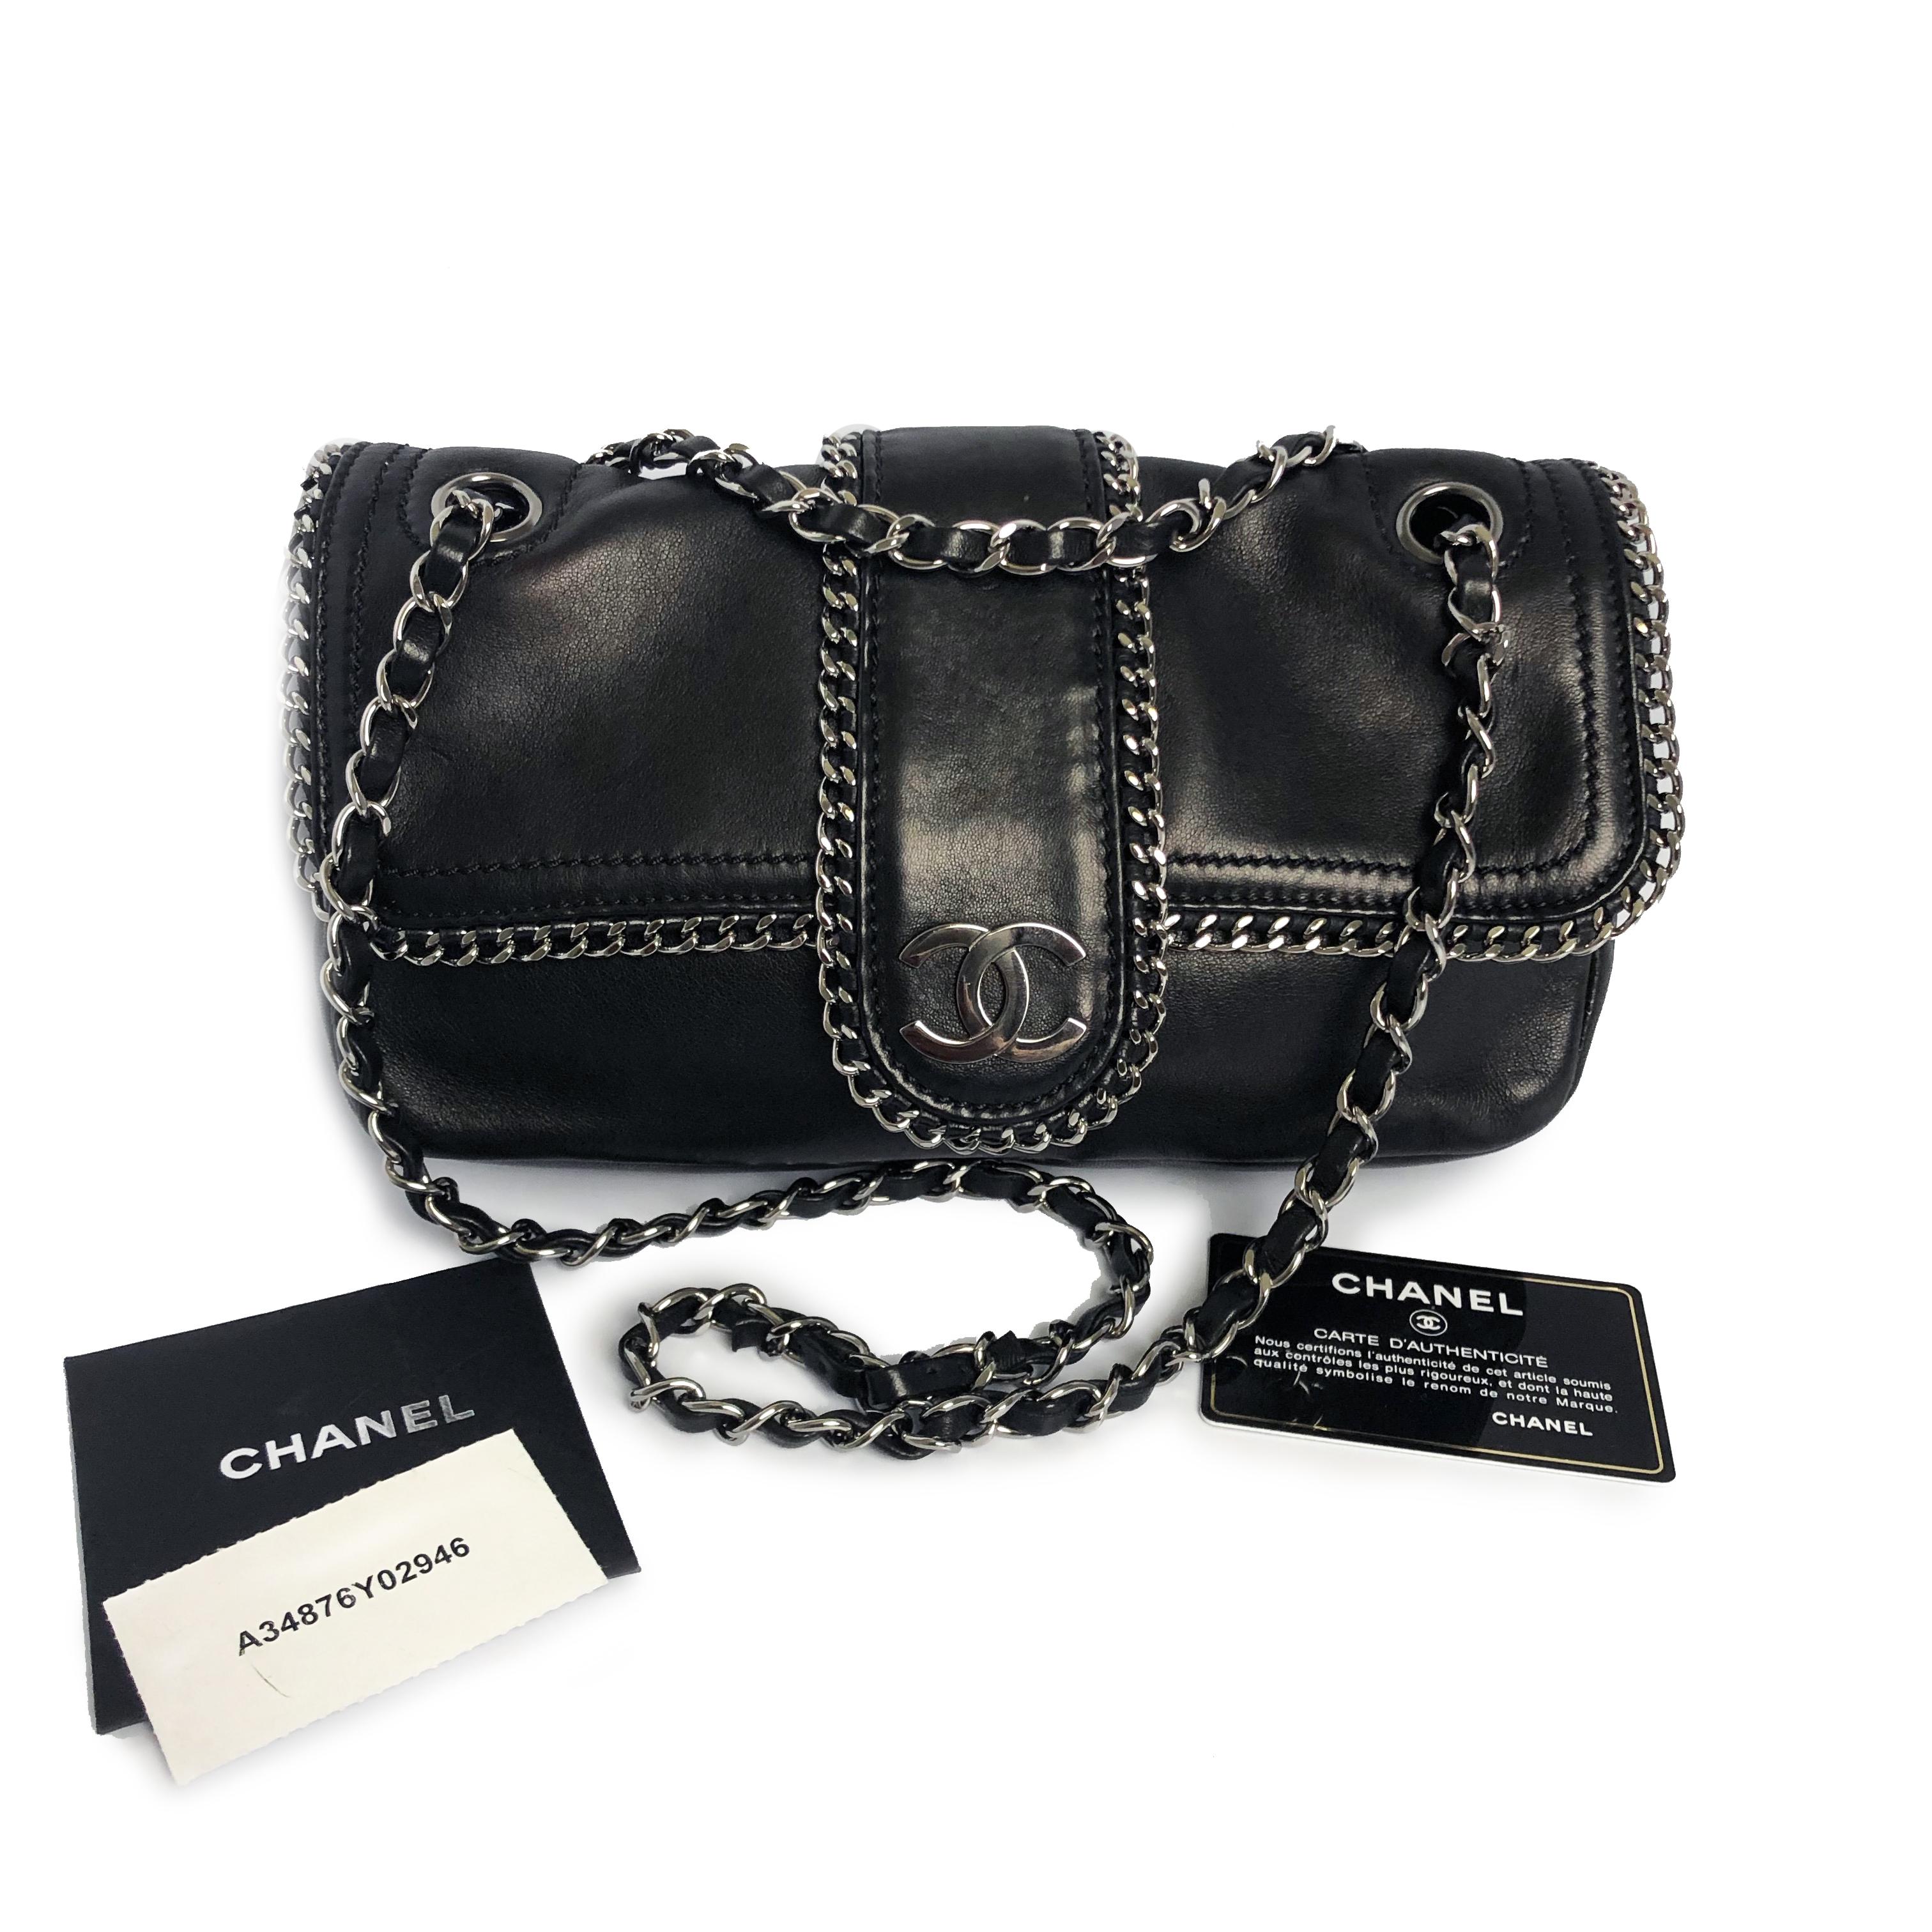 Authentic, preowned Chanel black lambskin leather Madison Chain Me flap bag from 2008. Supple lambskin leather exterior with silver hardware. Interior lined in quilted fabric with 1 zip pocket. Comes with dust bag, care pamphlet & card. Preowned